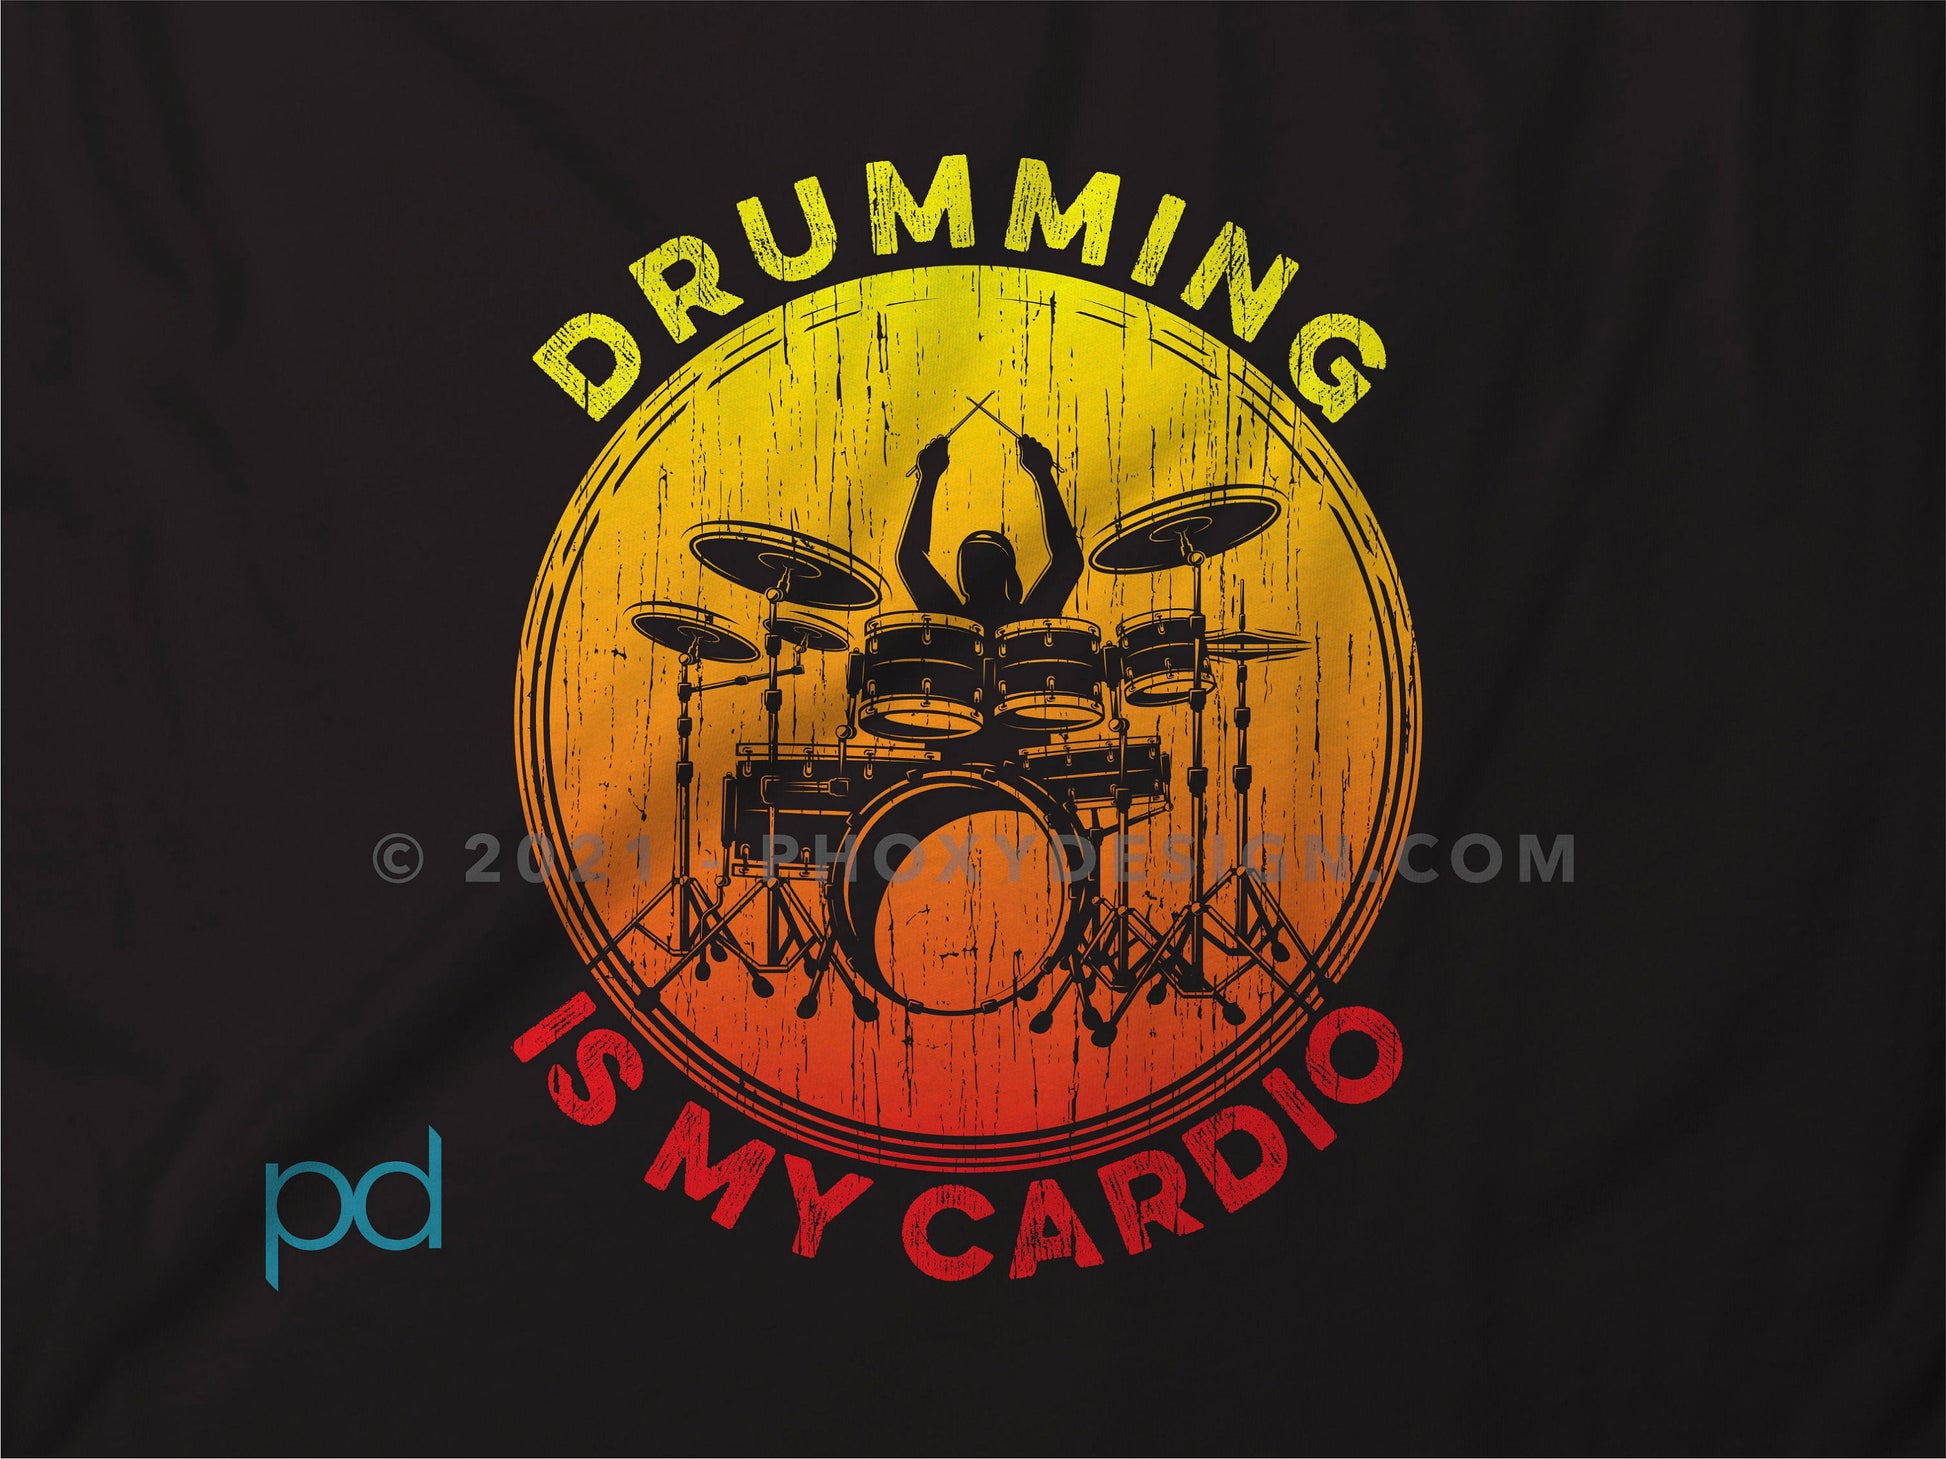 Funny Drummer T Shirt Gift, Drum Kit Player Present Idea, Drumming Is My Cardio Tee Shirt T Top